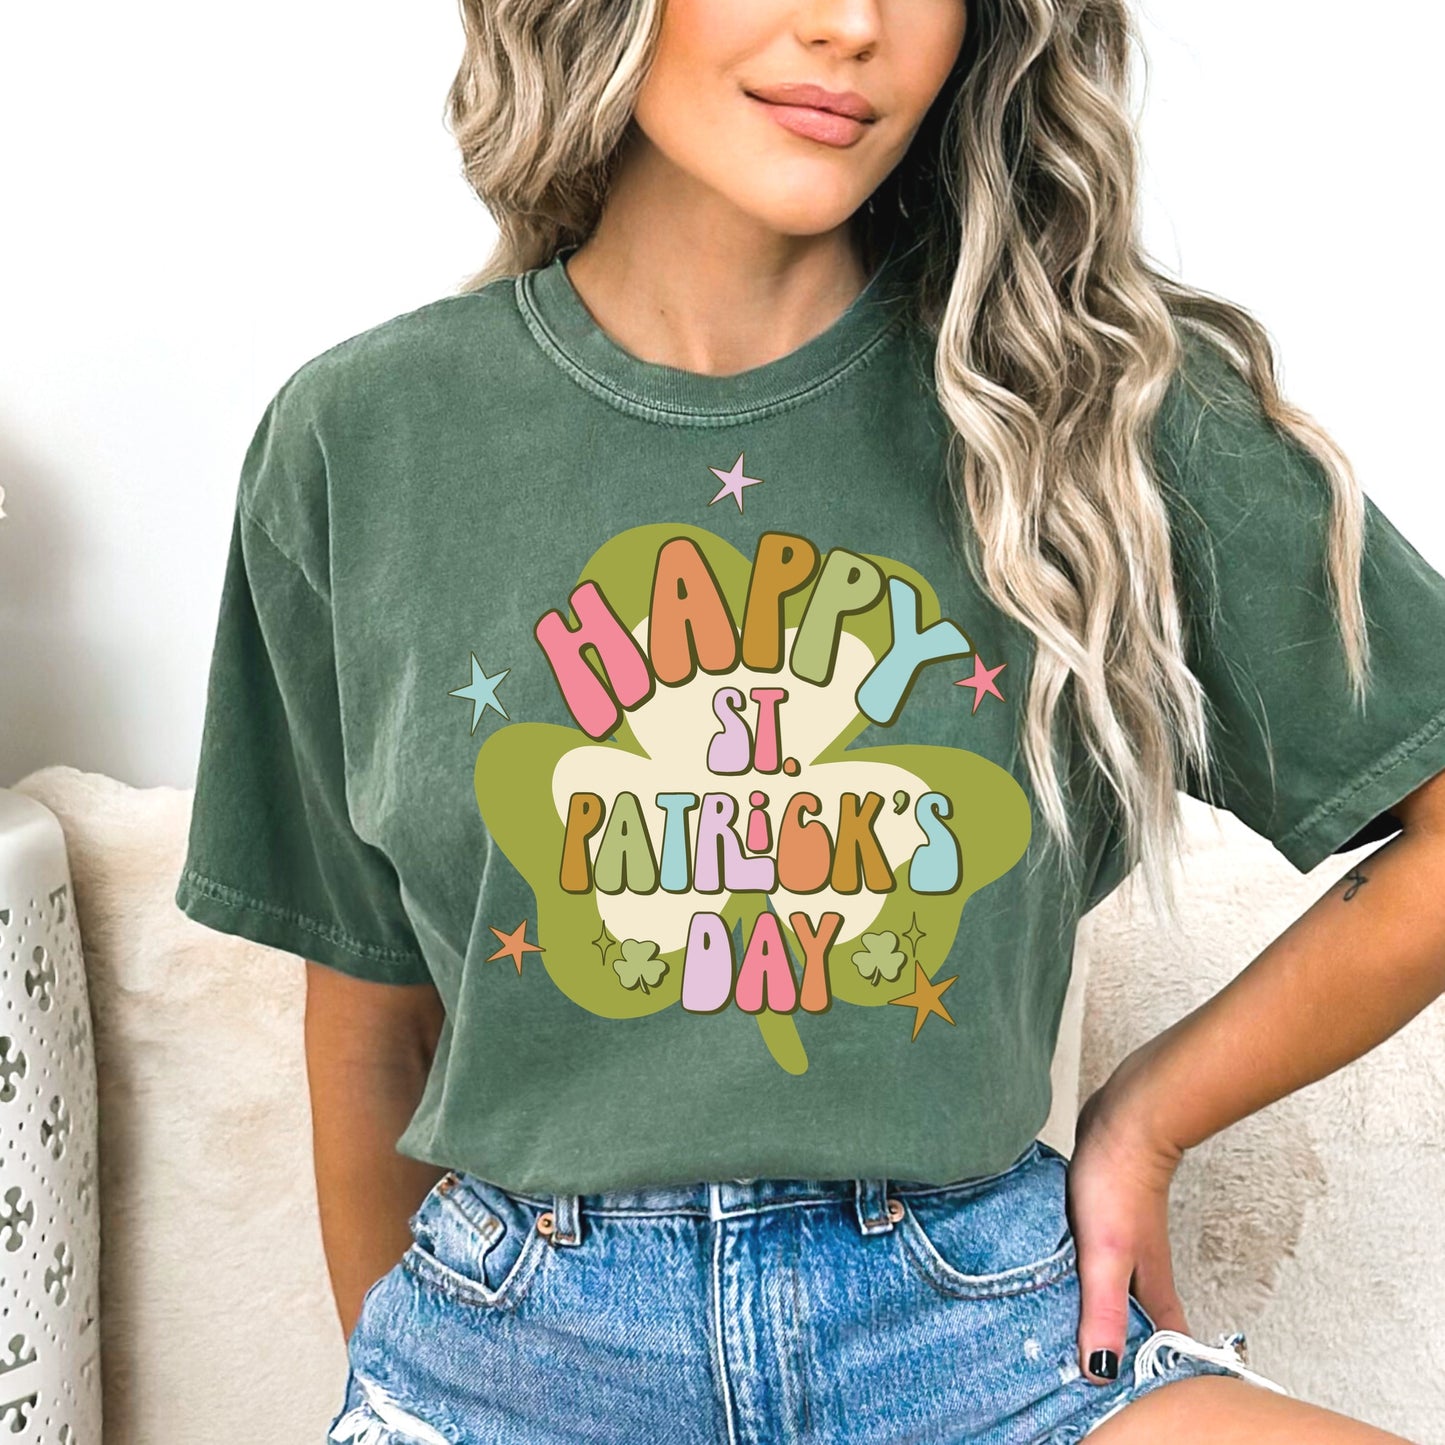 Green Clover that says "Happy St. Patrick's Day" in a rainbow font - Iron on heat transfer - sublimation heat transfer 